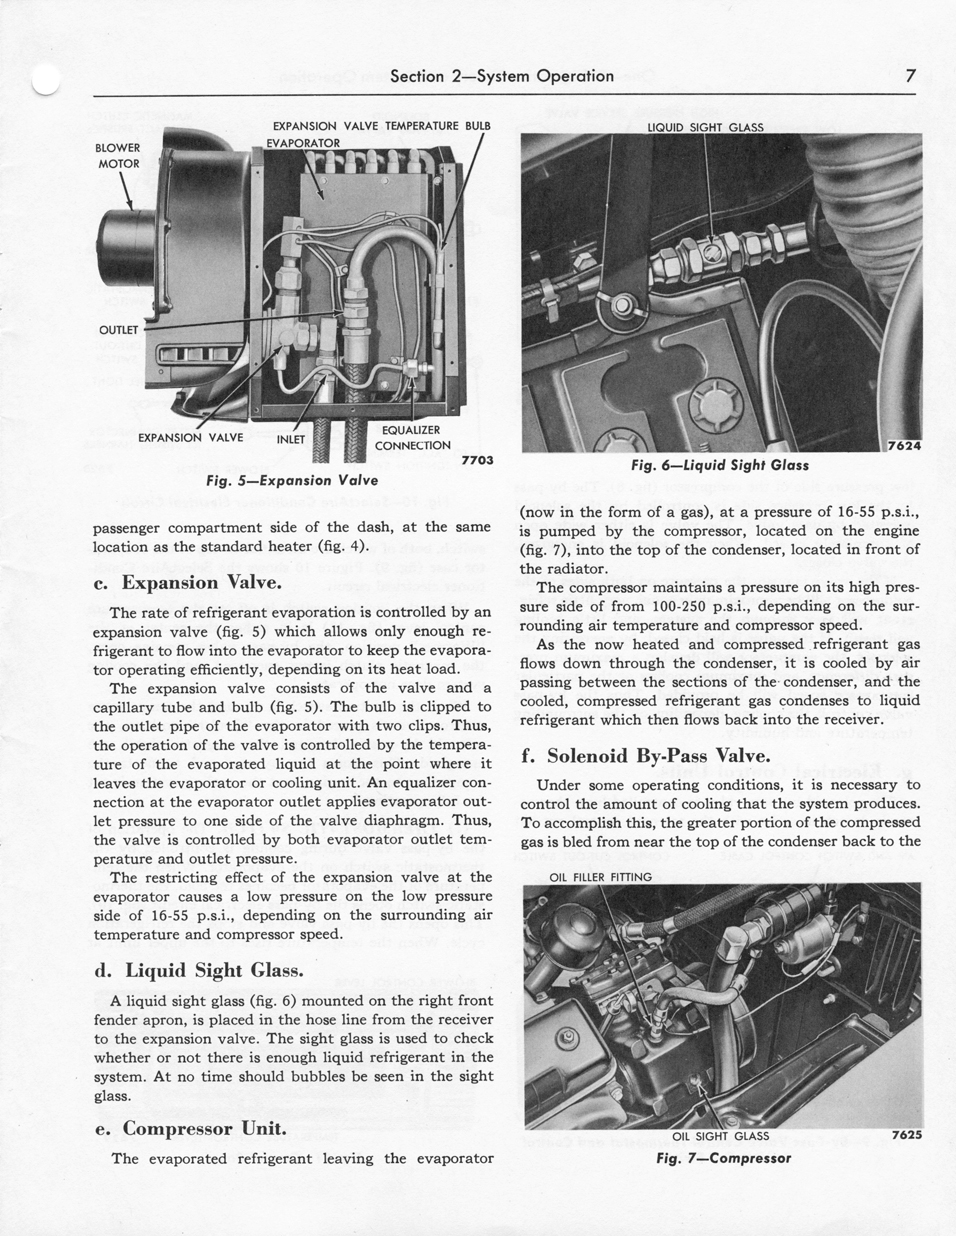 1956 Ford Car Air Conditioning Shop Manual Page 7 - "SelectAire Conditioner"